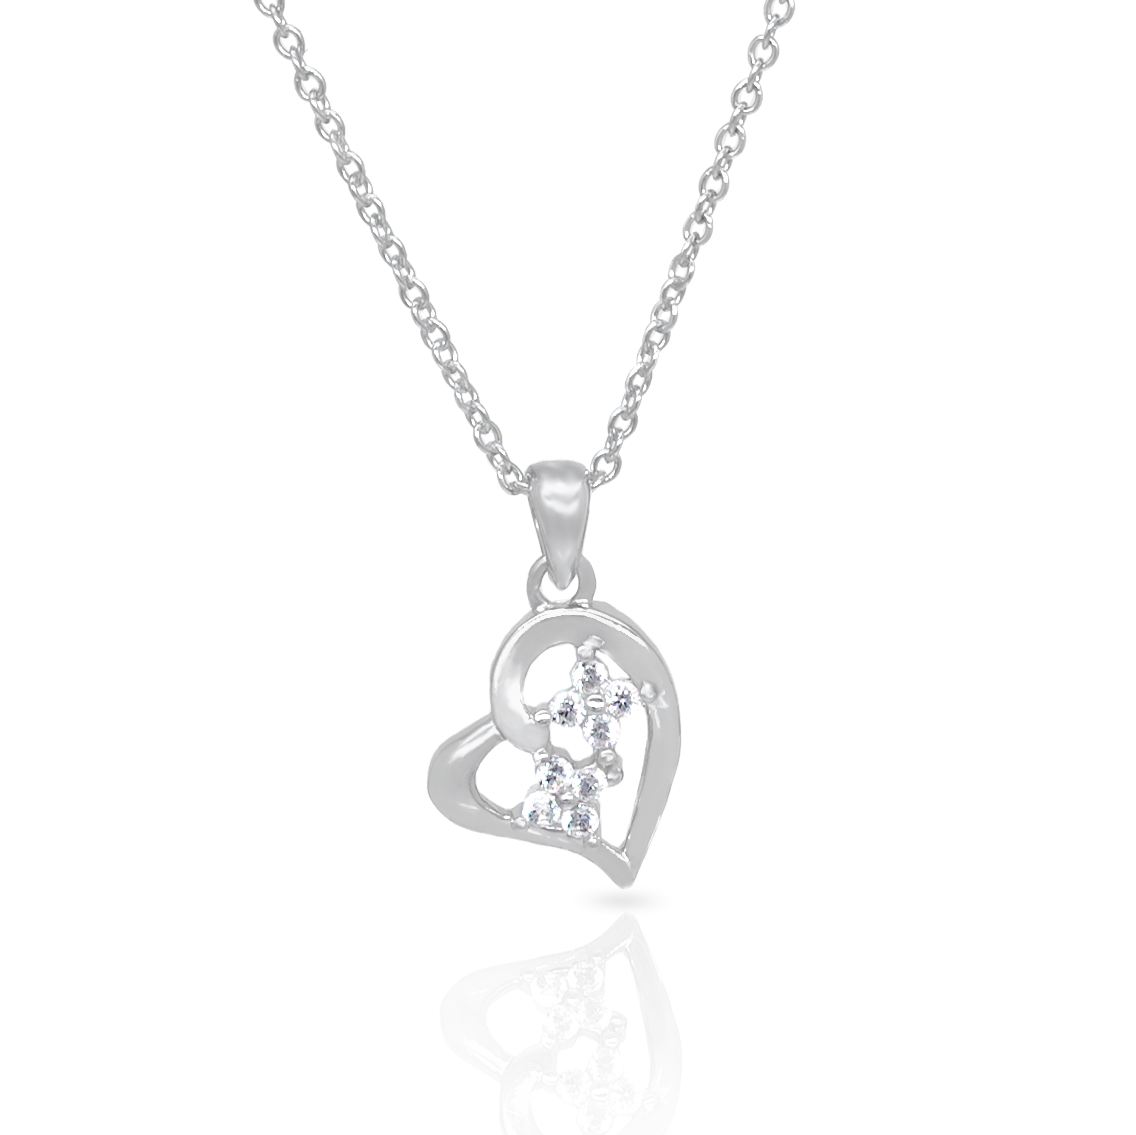 Heart Necklace in Sterling Silver by Tilo Jewelry